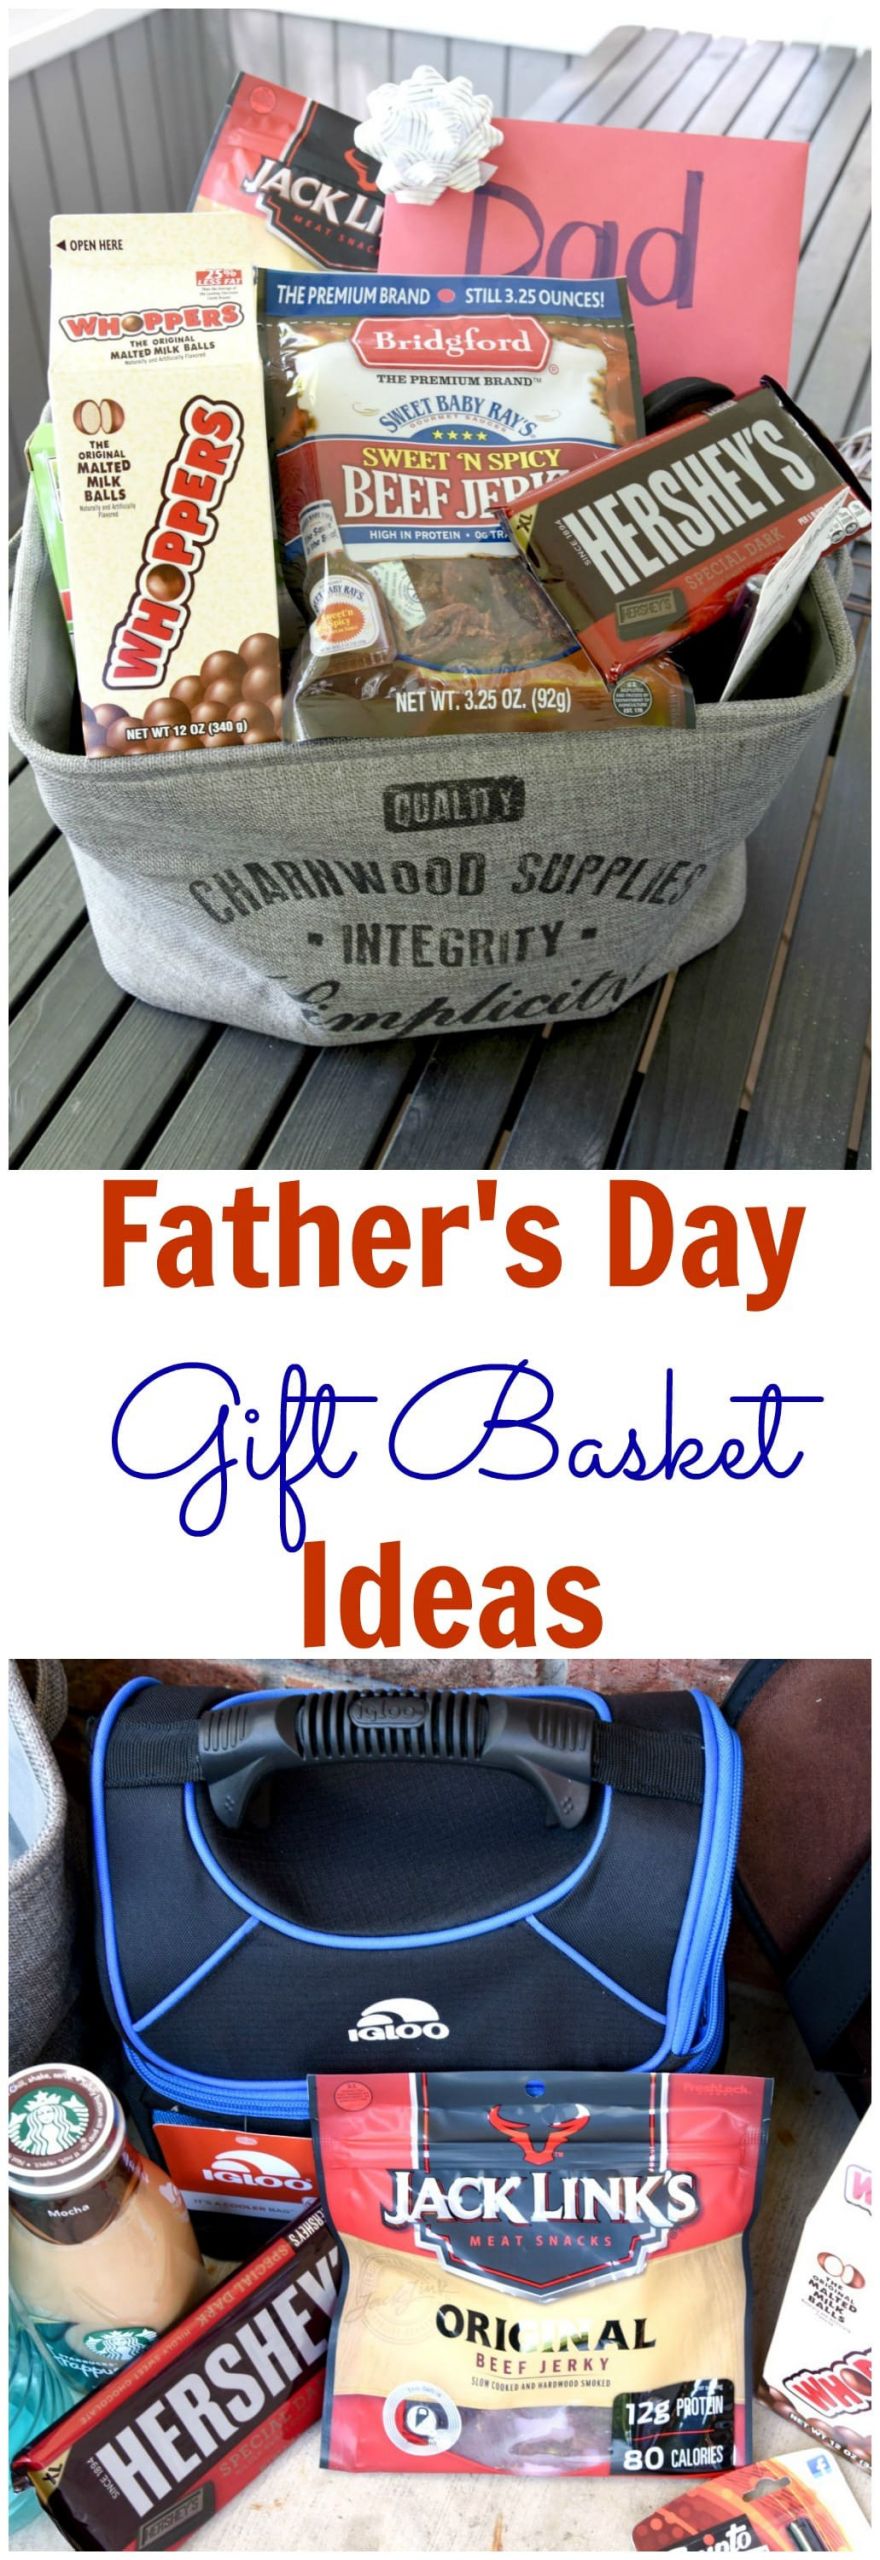 Dad Gift Basket Ideas
 Tips to Create a Father s Day Gift Basket Dad will Love